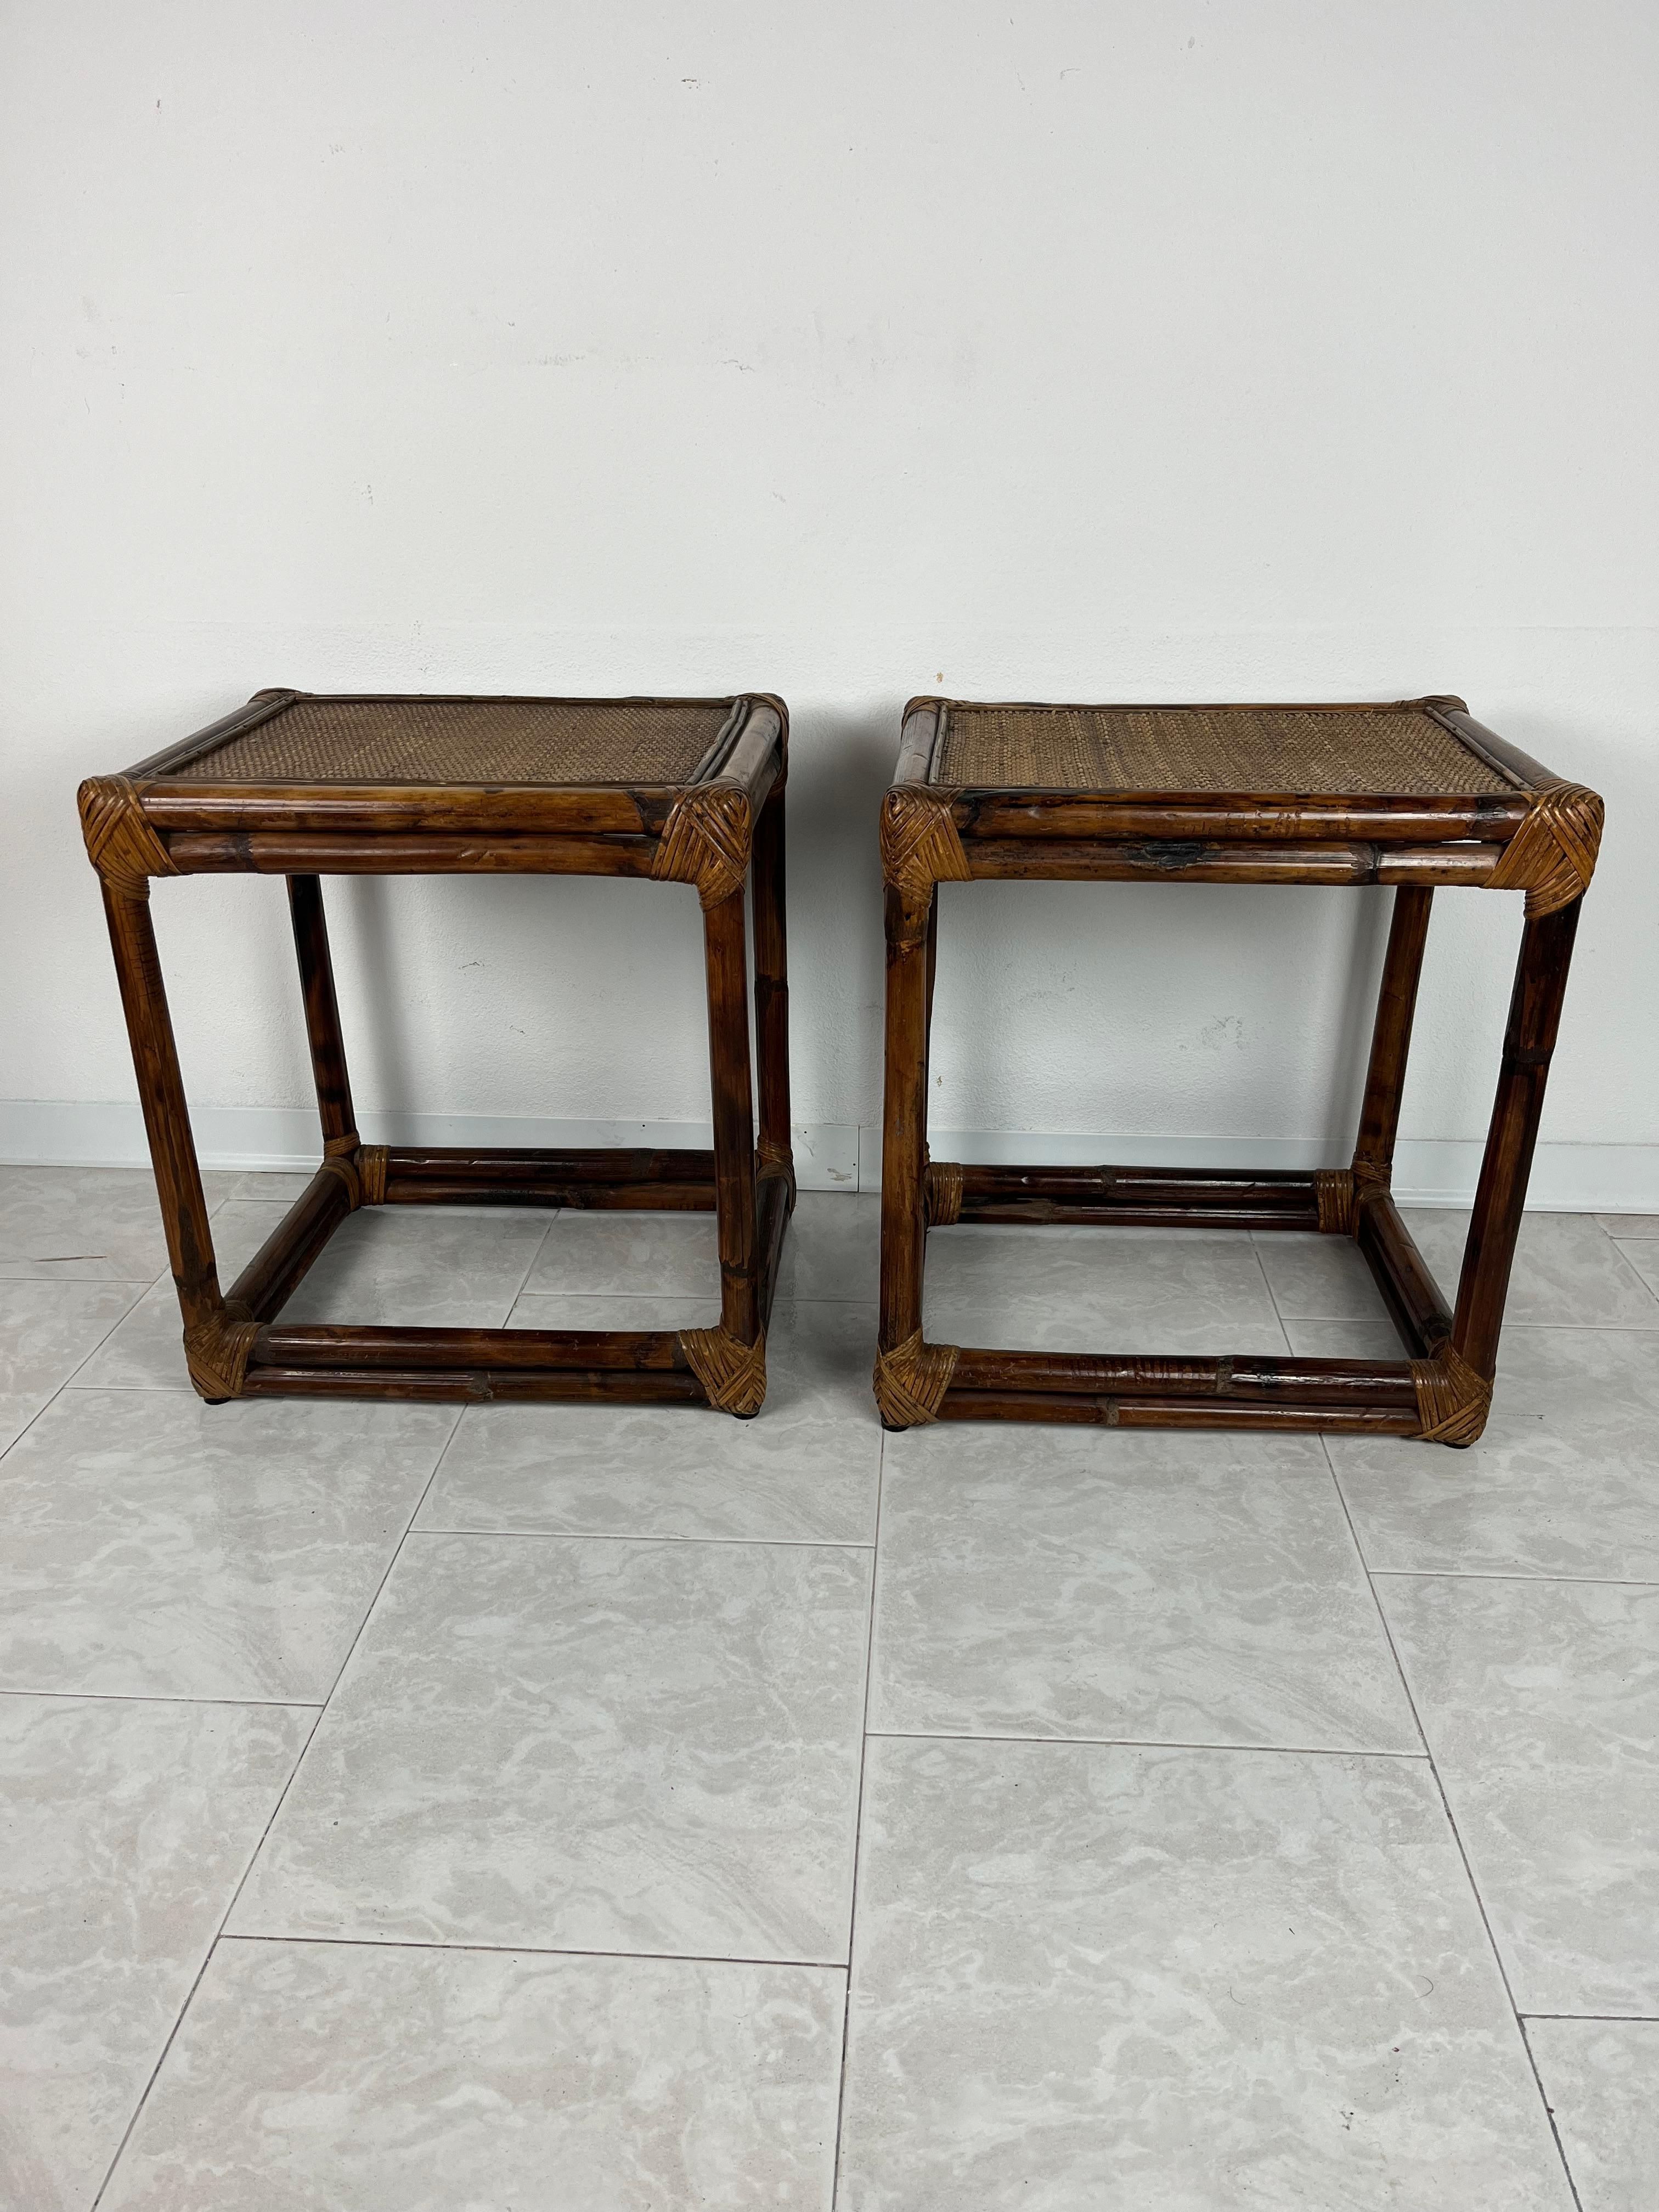 Pair of Bamboo Bedside Tables, Italy, 1960s For Sale 3